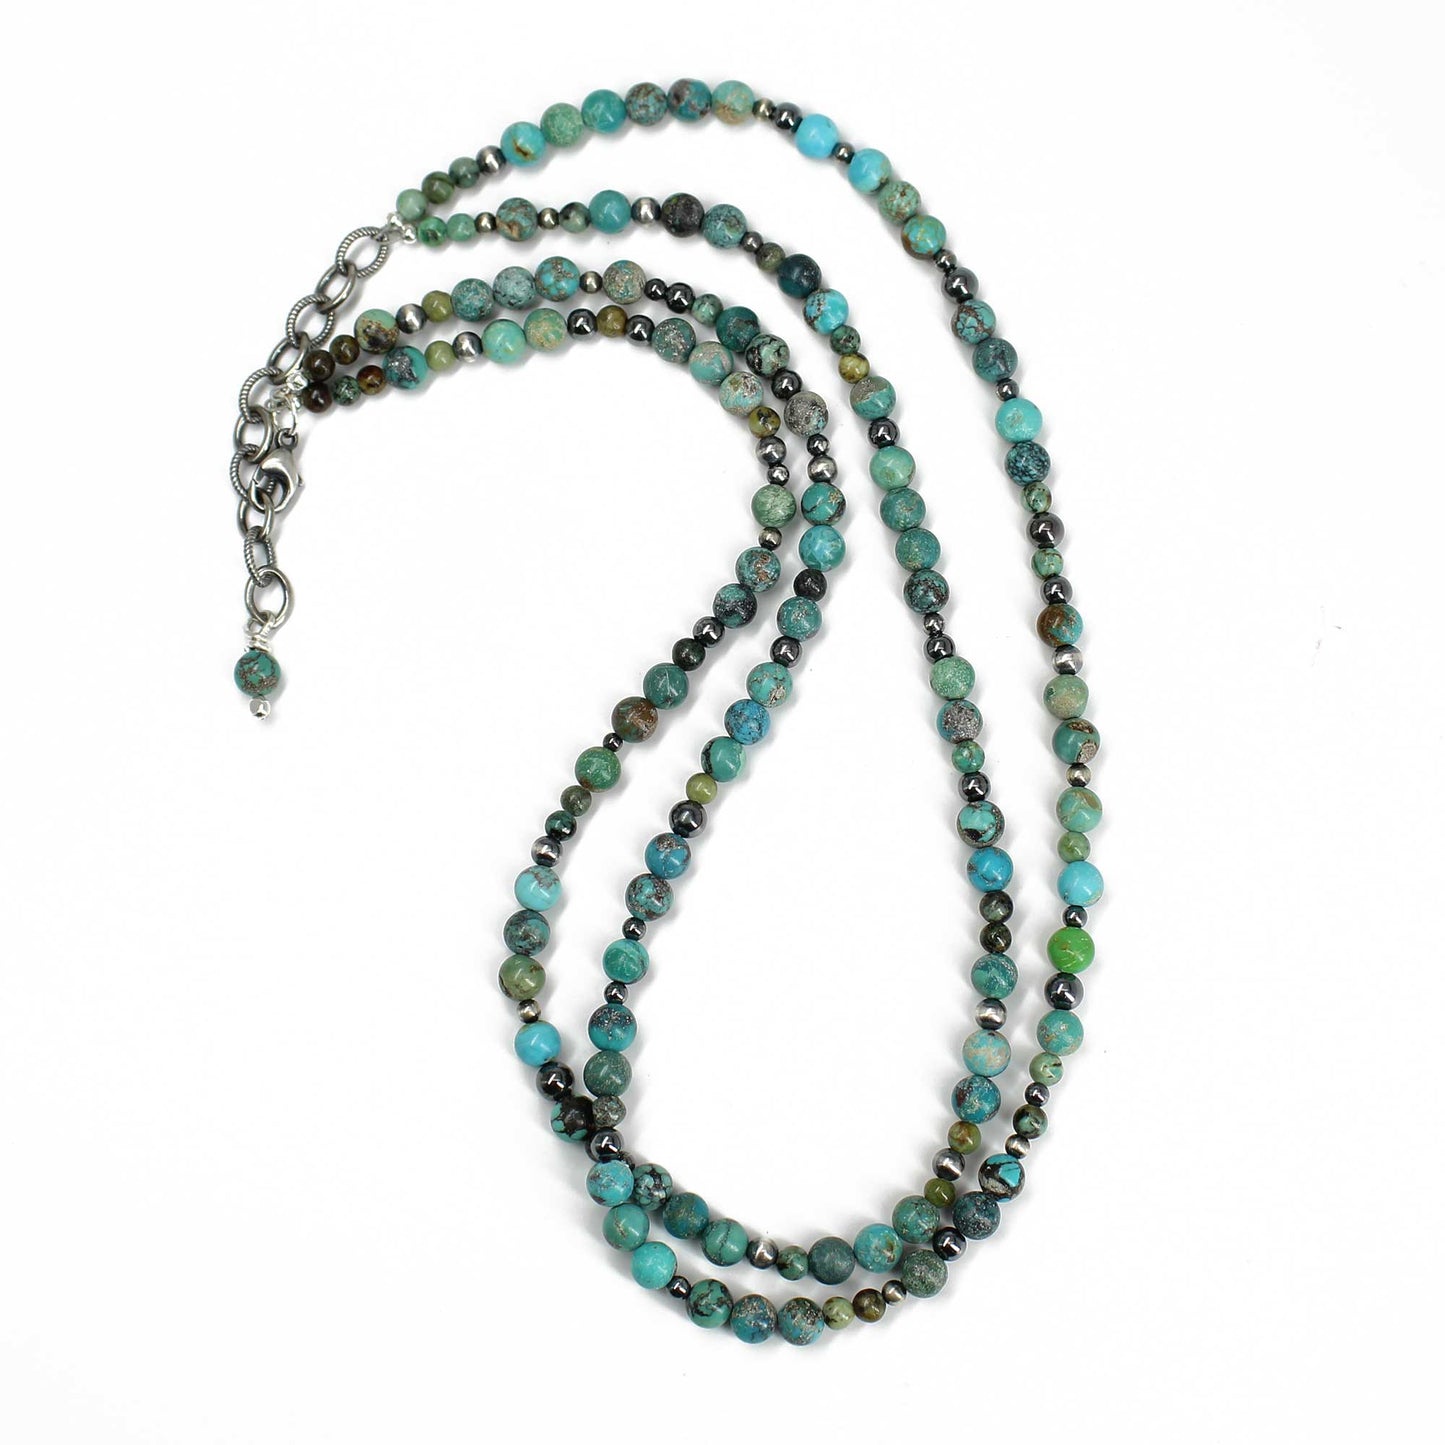 Double Strand Hubei Turquoise and Antiqued Sterling Silver Bead Necklace